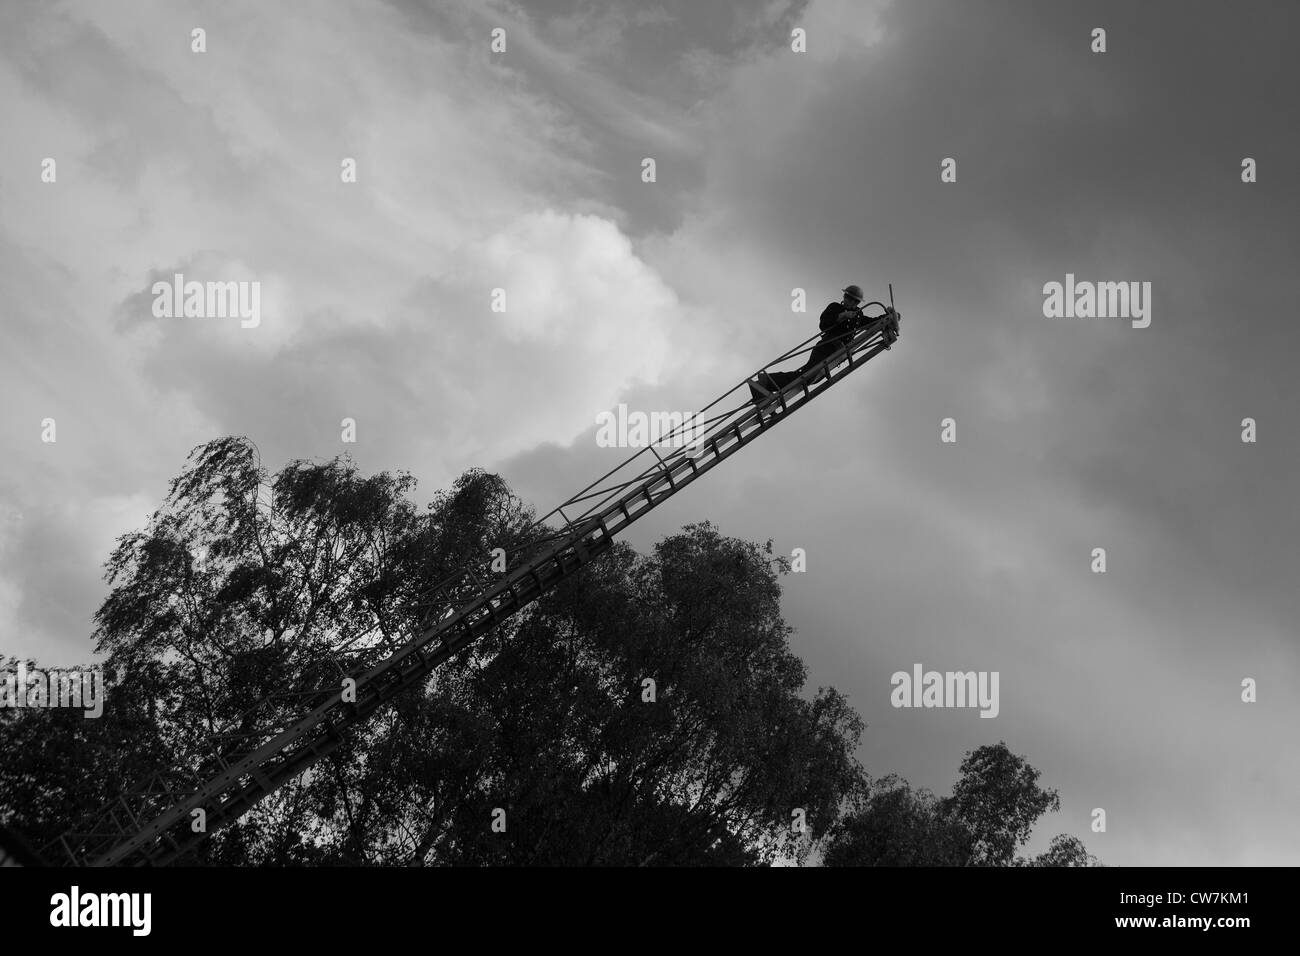 Member of the 1940's National Fire Service on ladder with water jet/hose Stock Photo